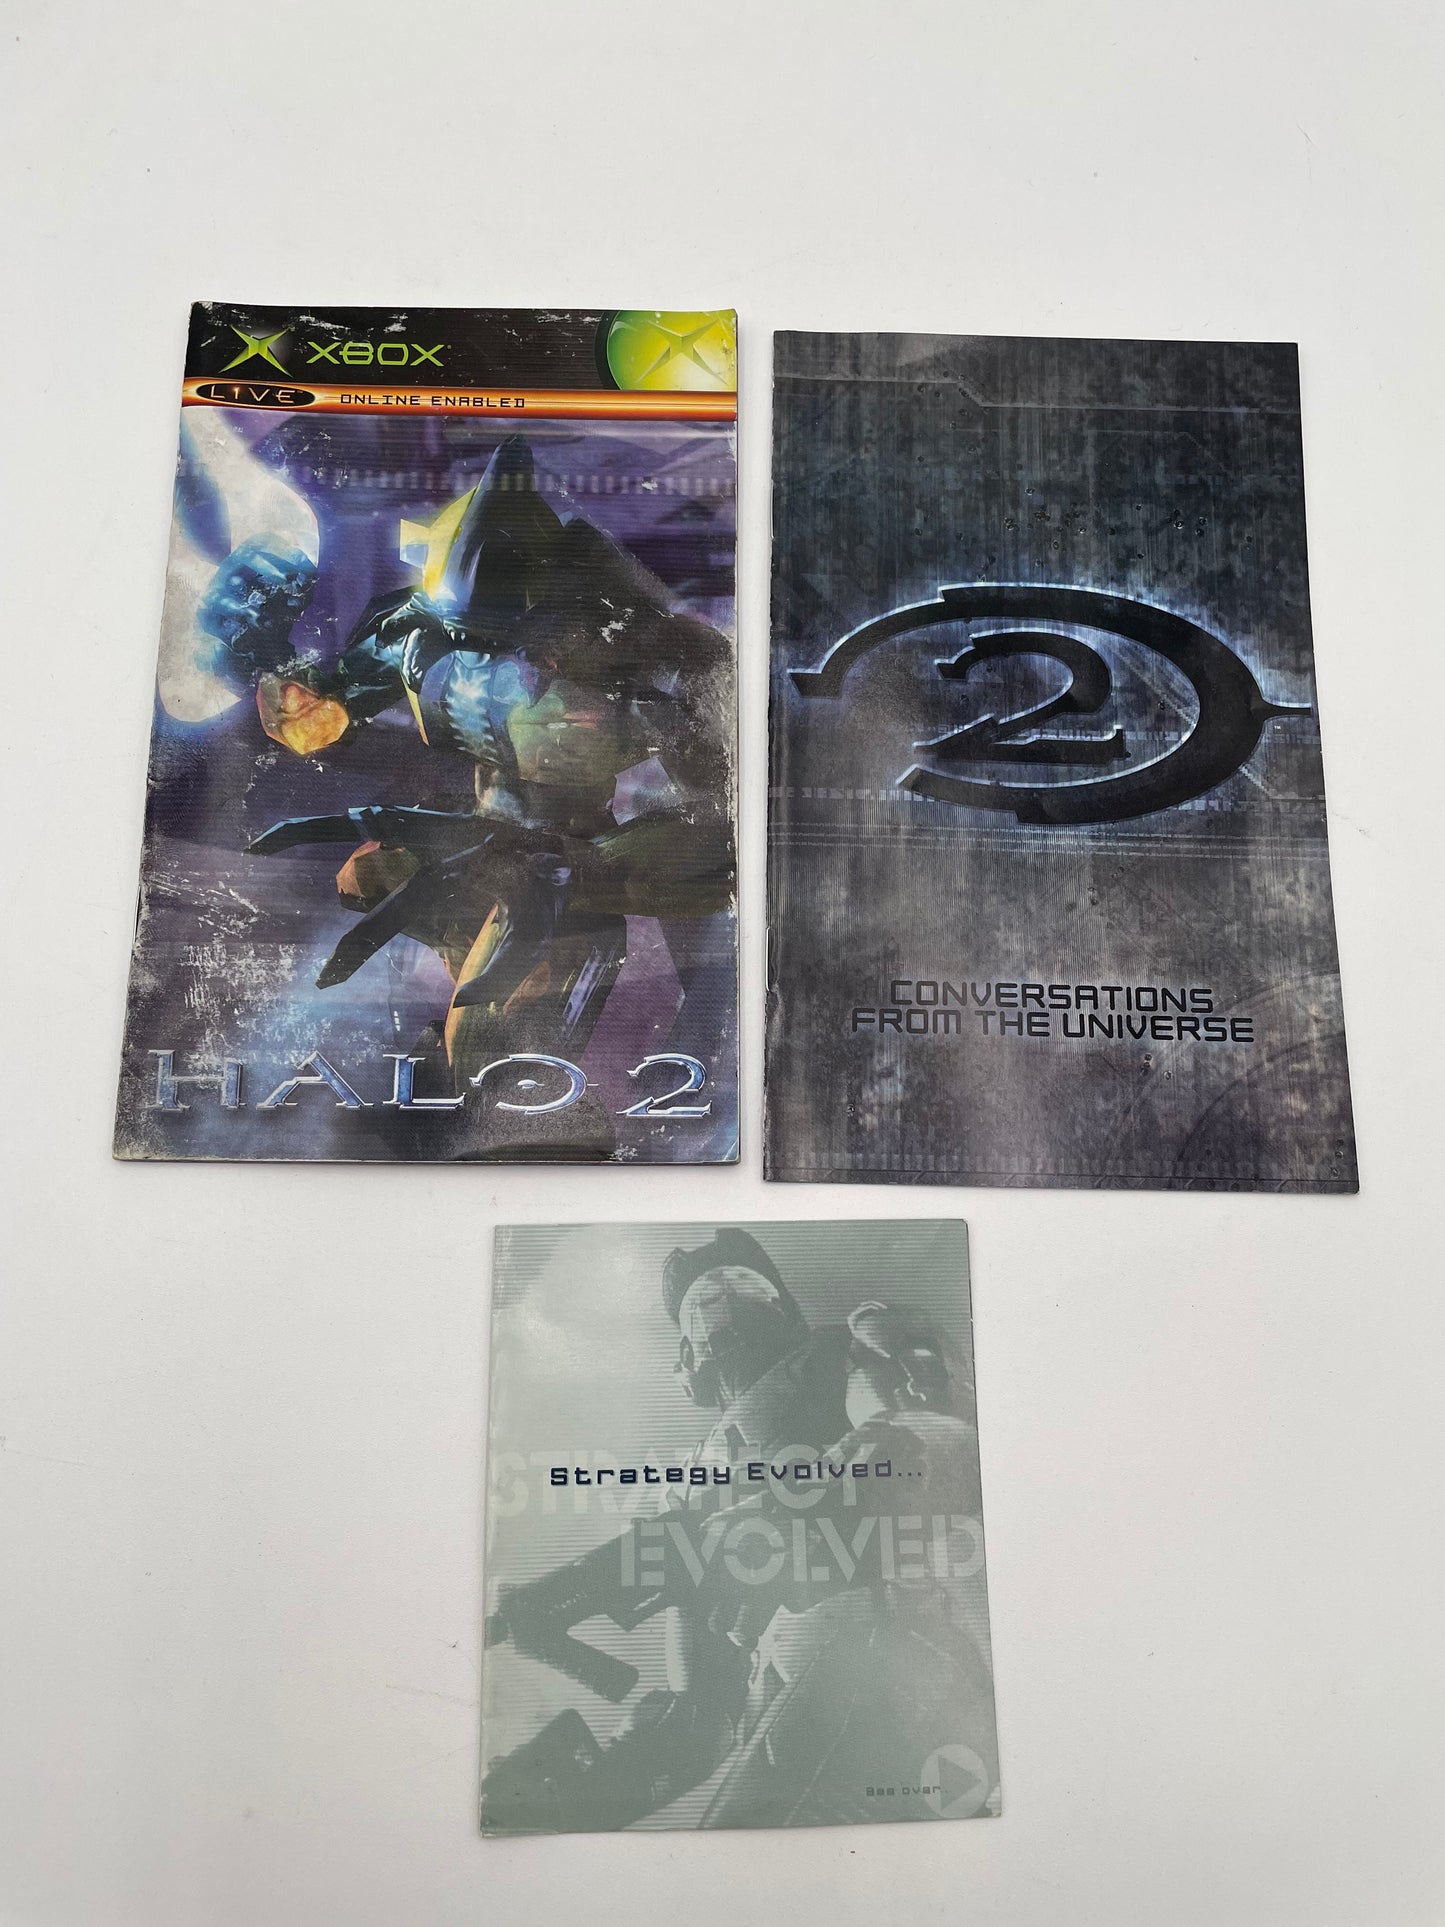 Halo 2 - XBox - Limited Edition Steel Book w/Insert #103773